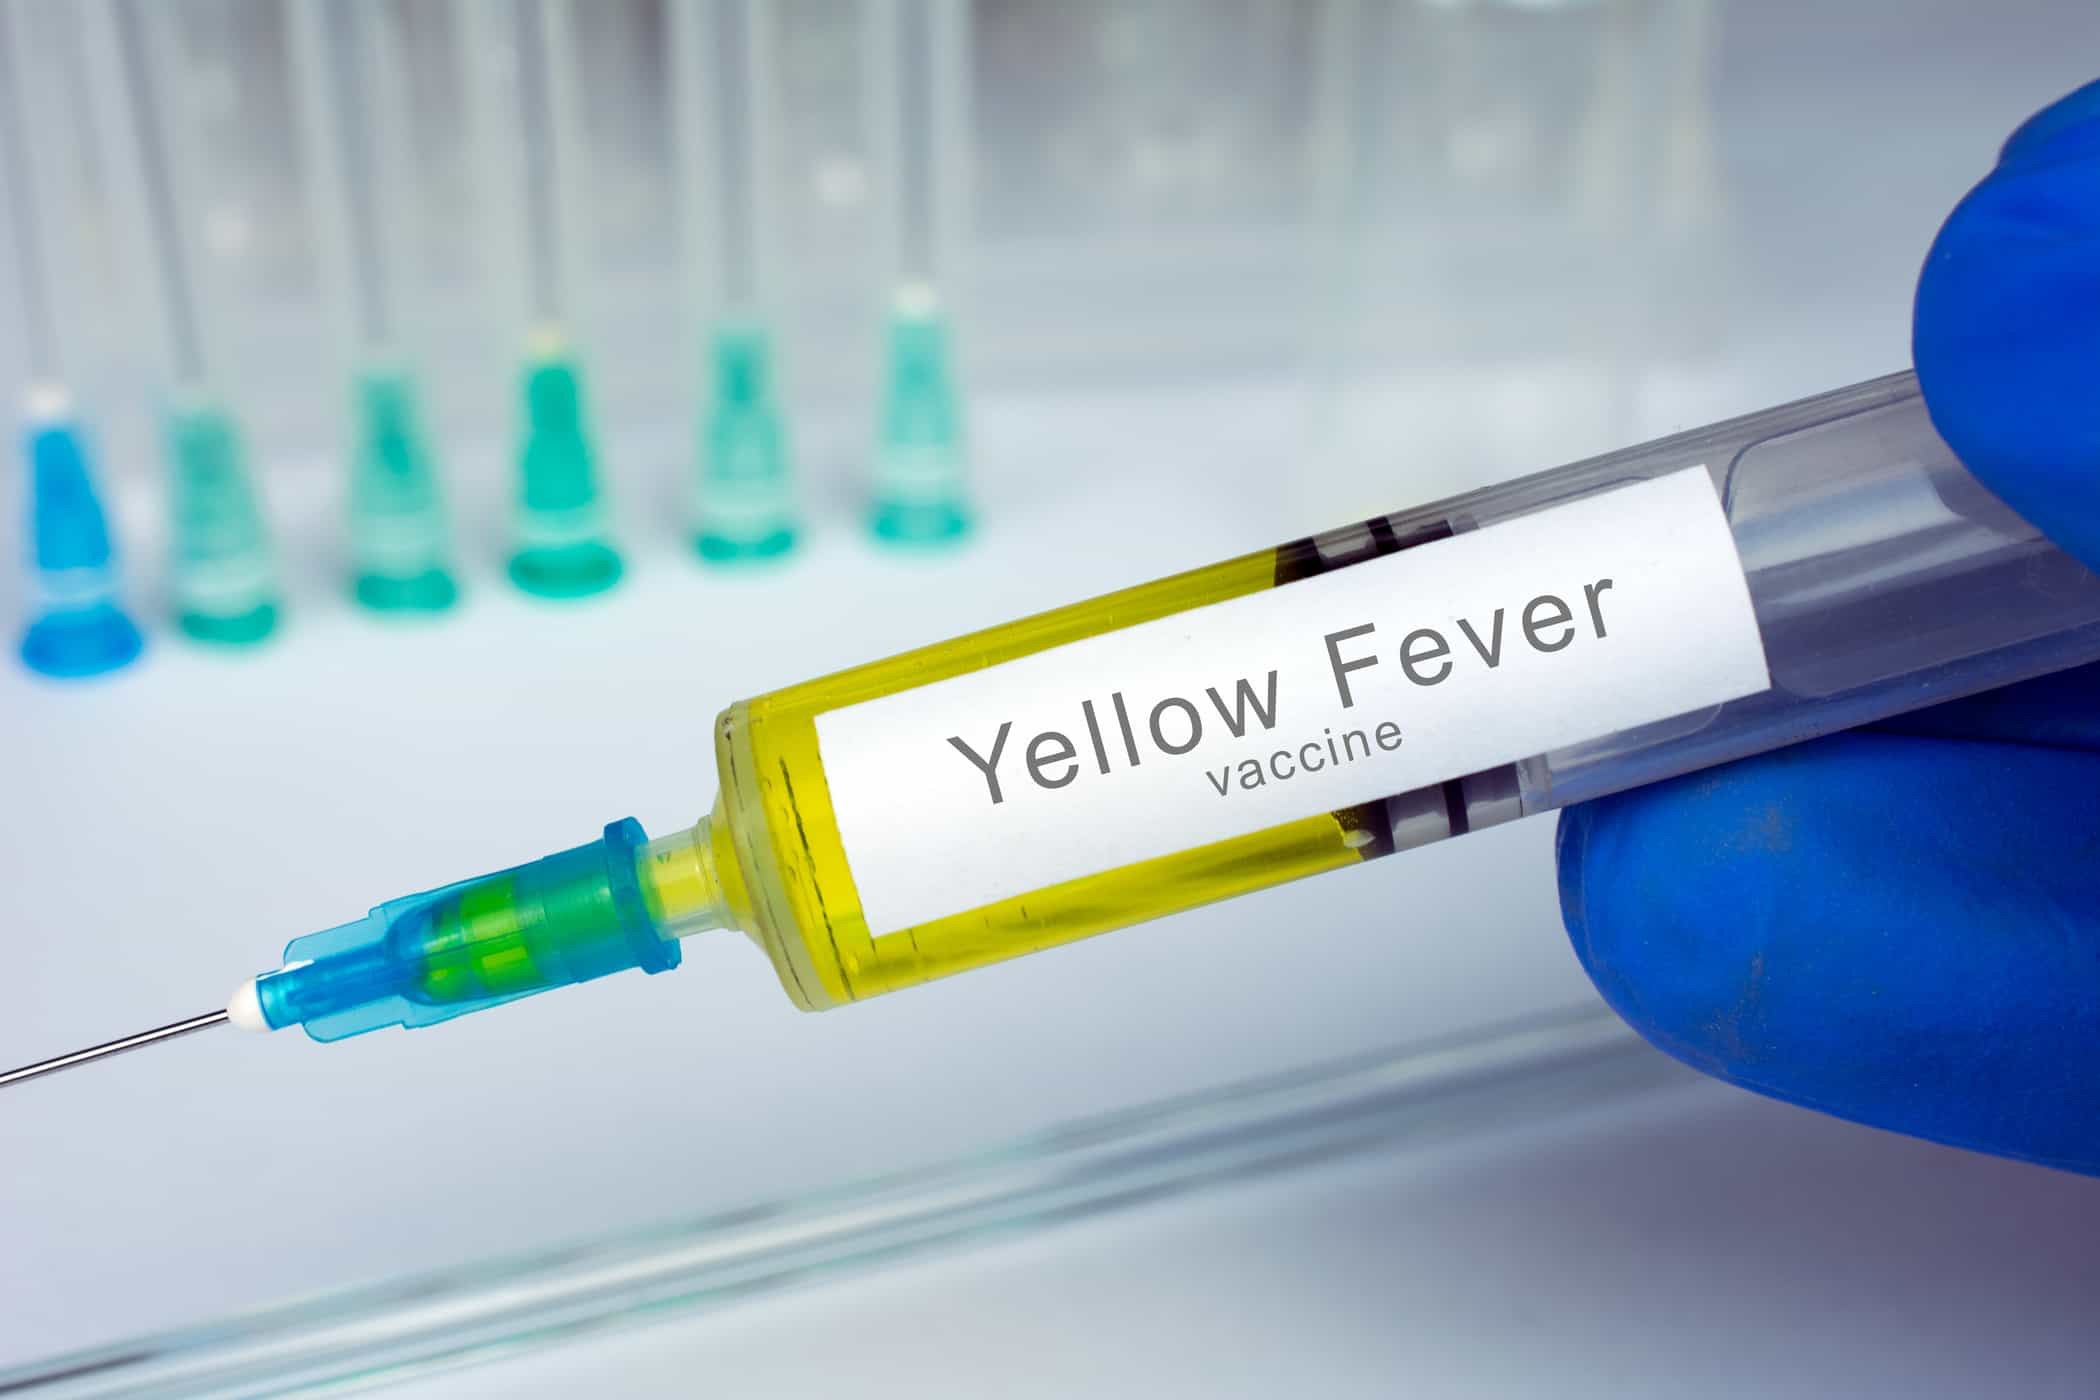 Ministry of Health, partners roll out yellow fever vaccine in WES